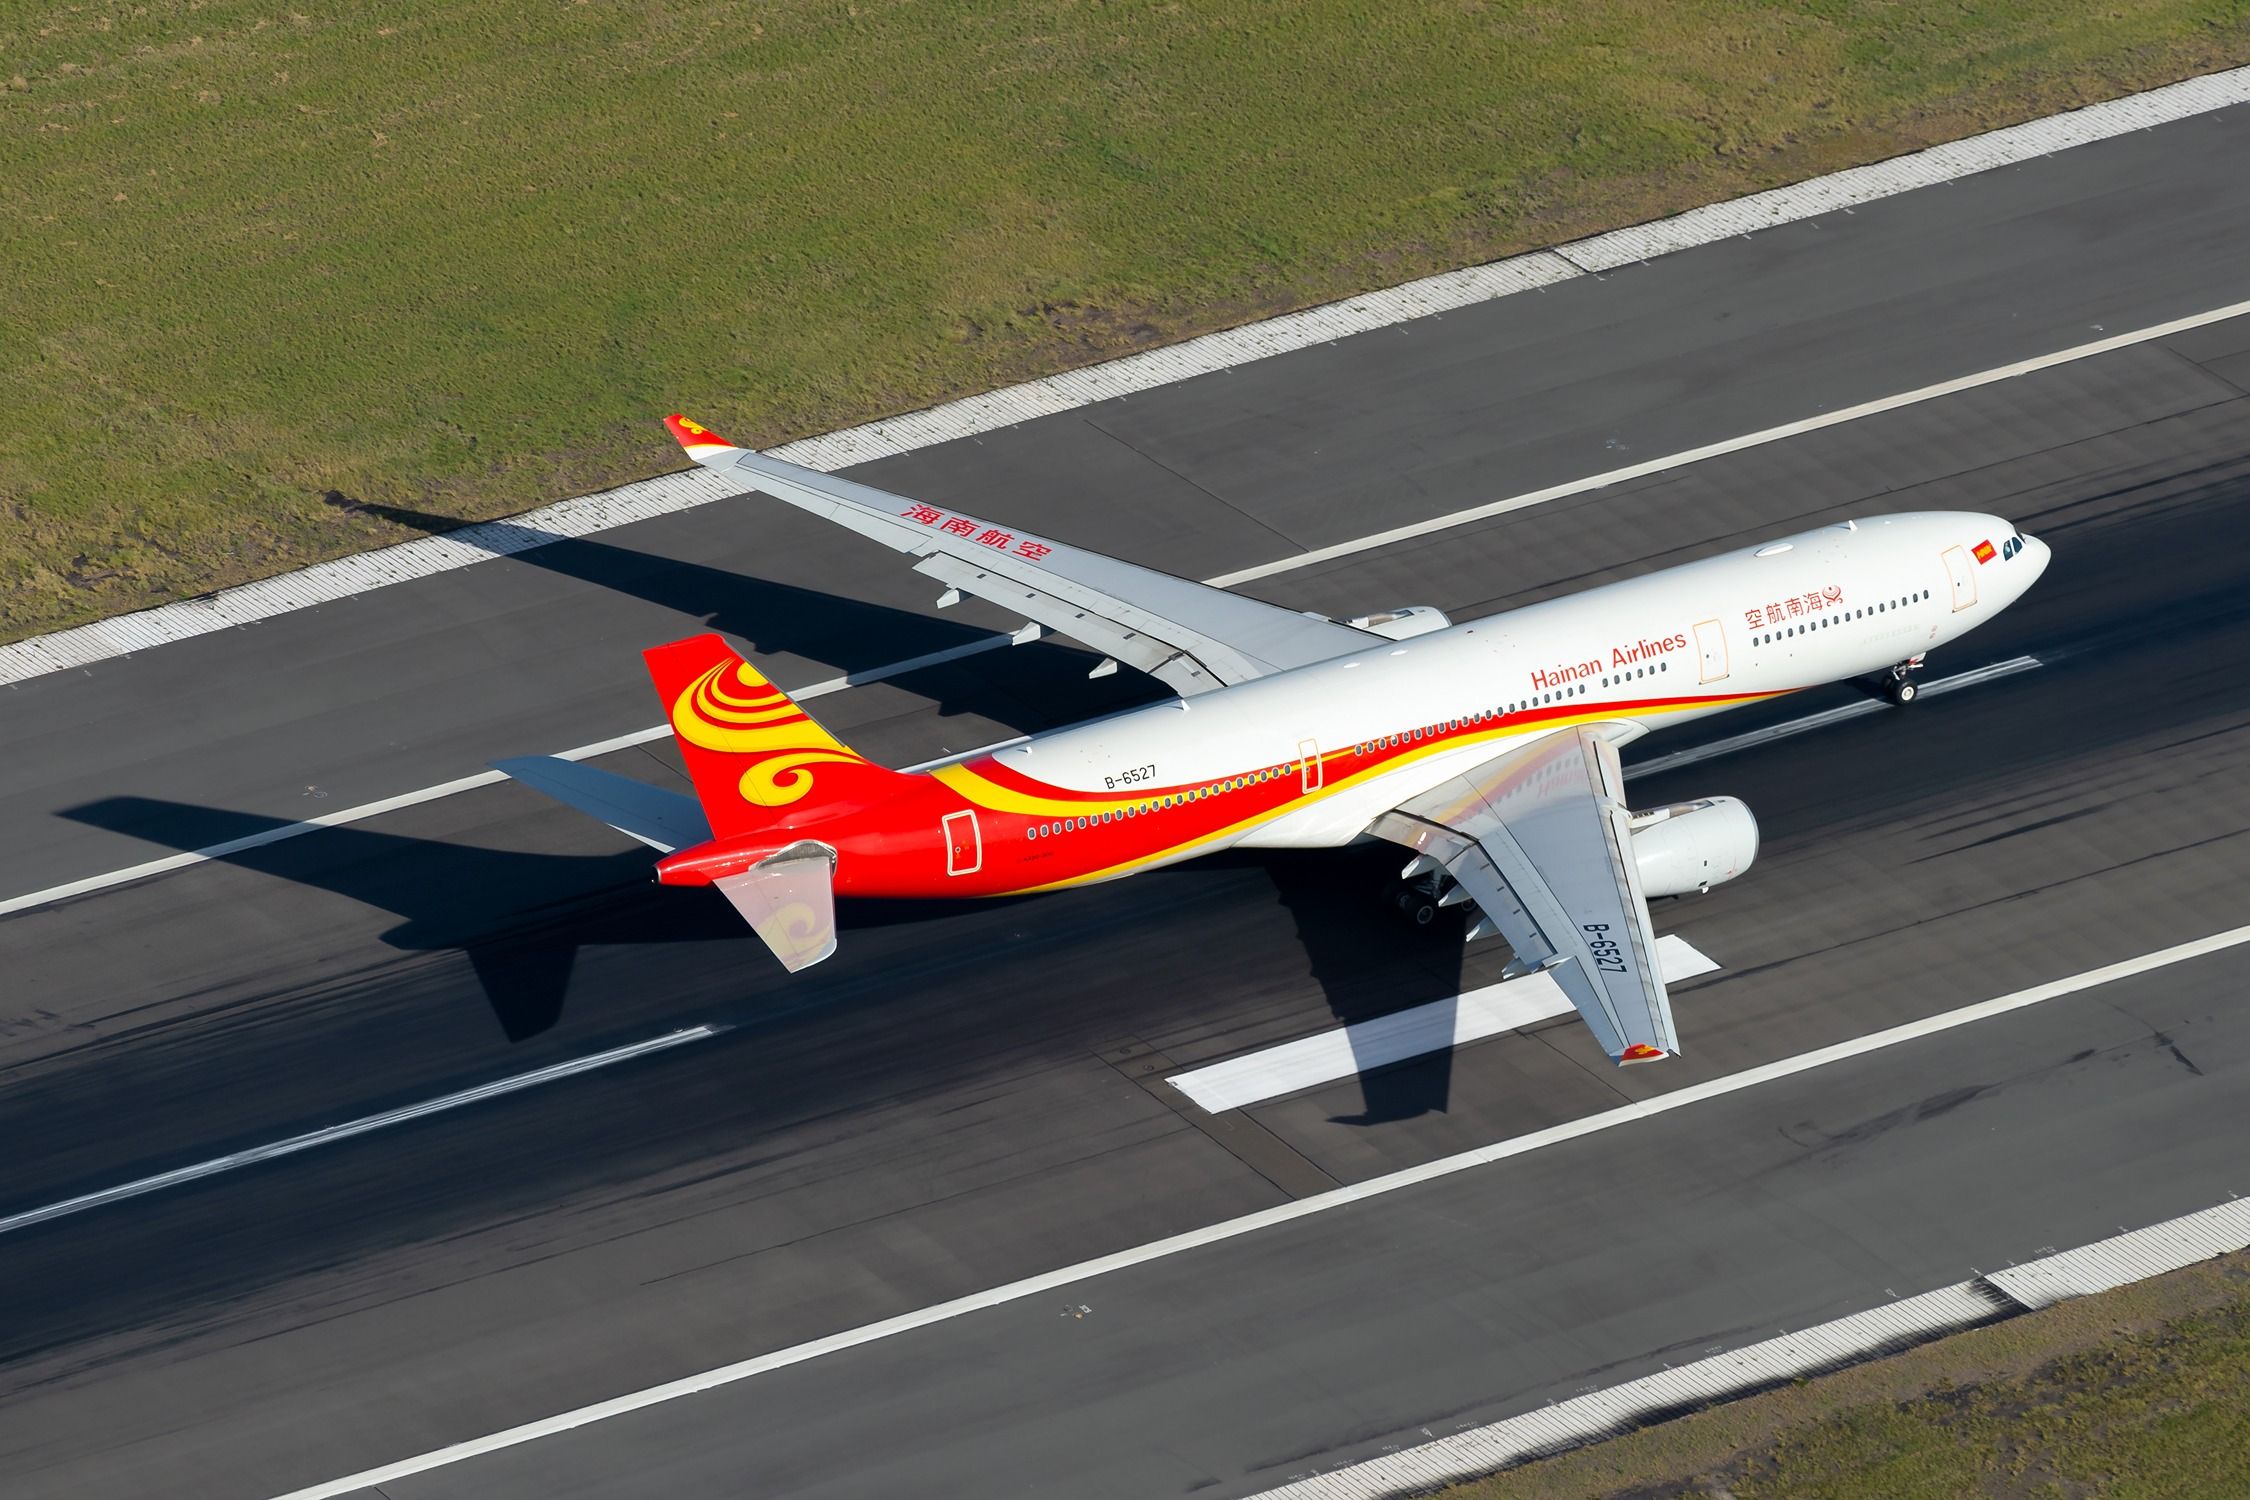 Hainan Airlines Airbus A330 landing